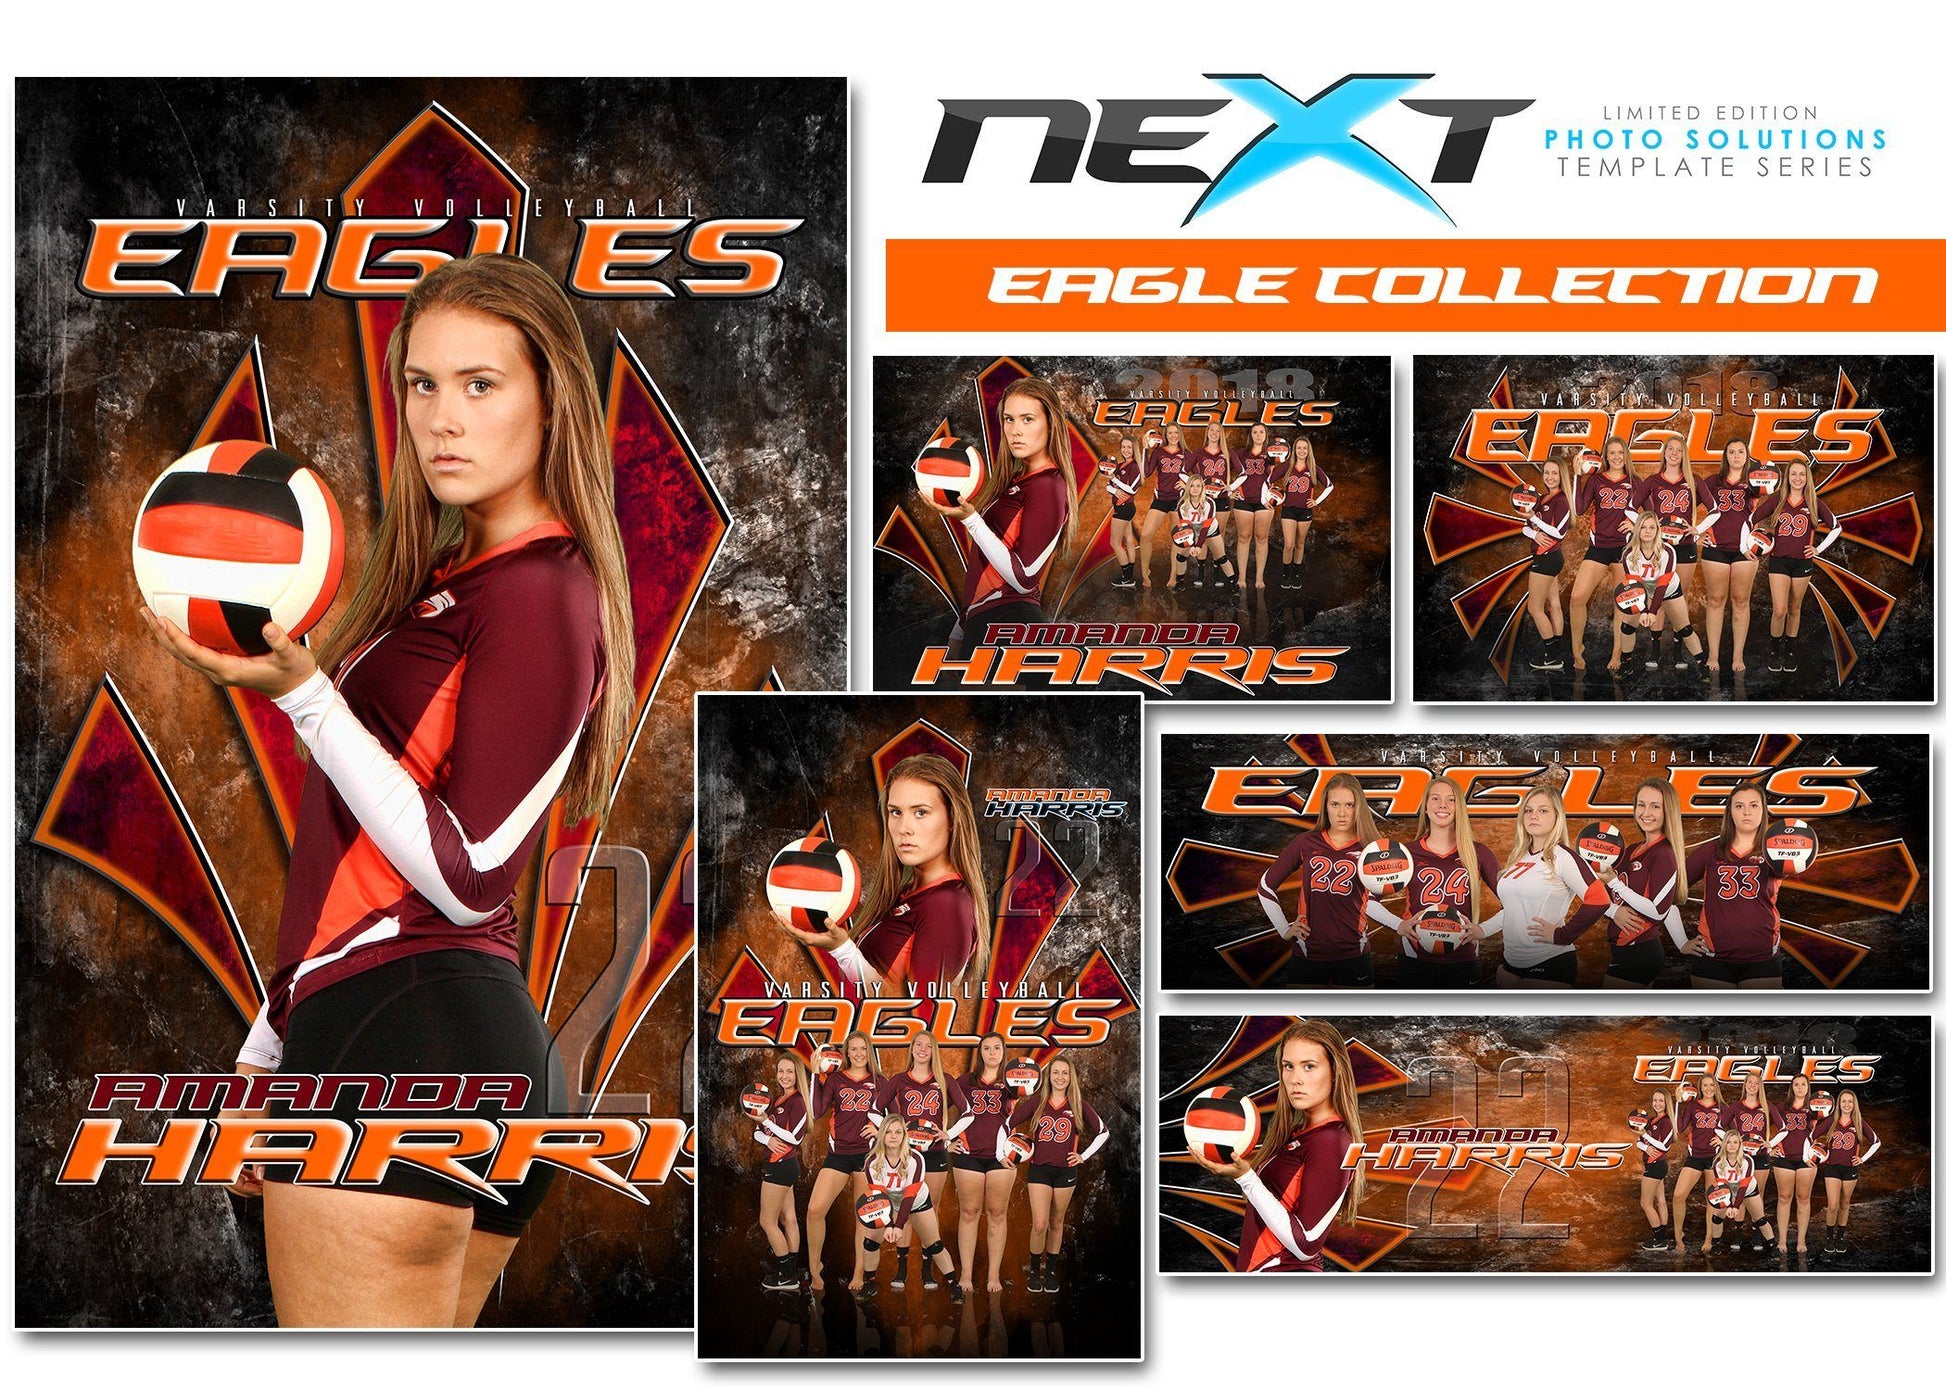 01 Full Set - EAGLE Collection-Photoshop Template - Photo Solutions